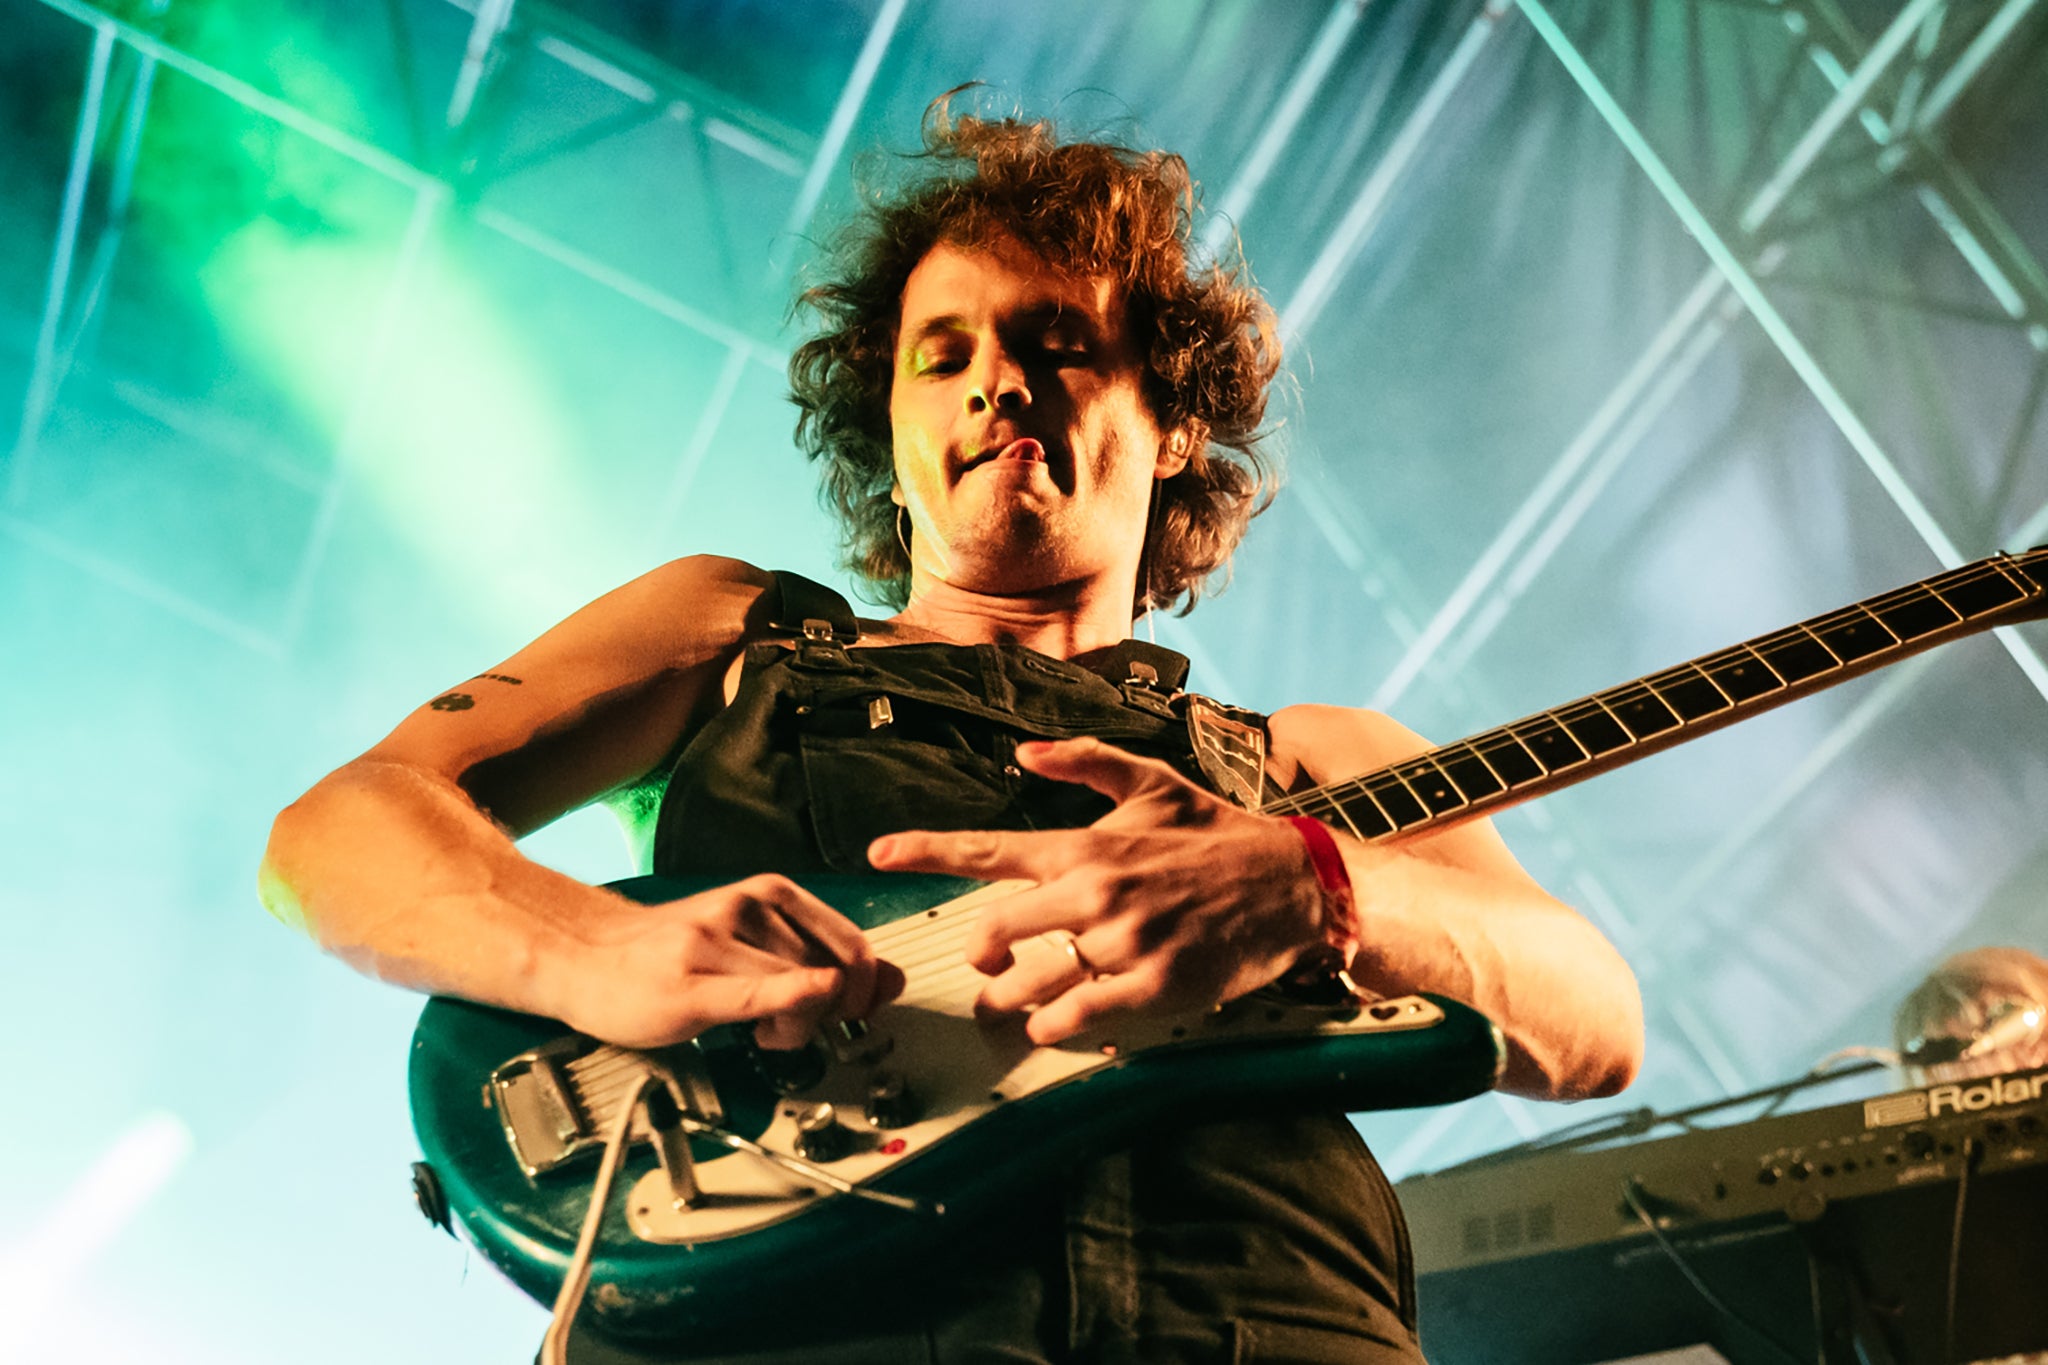 <p>Running out of guitar: King Gizzard and the Lizard Wizard delight with a predictably energetic live performance </p>